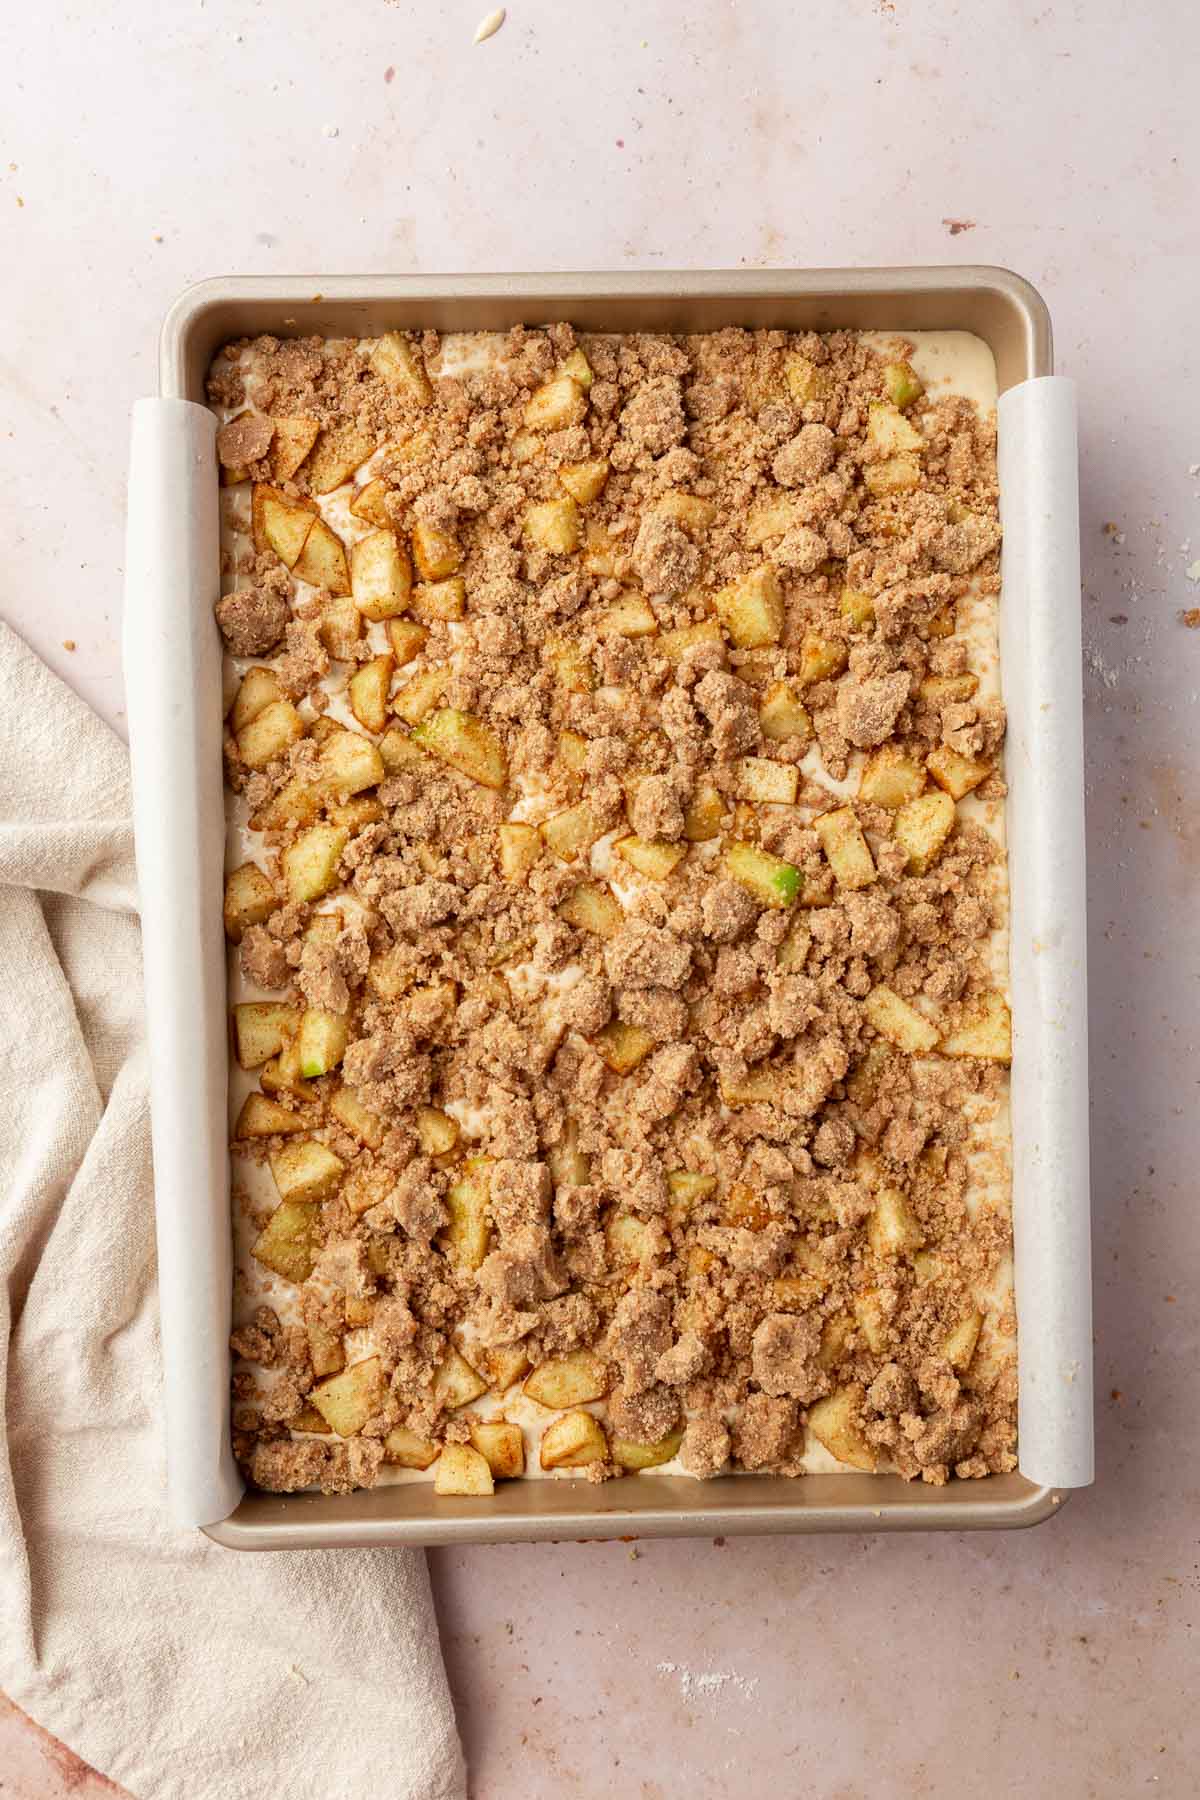 A rectangular baking pan filled with a cheesecake filled topping with spiced granny smith apple cubes and gluten-free cinnamon streusel before baking in the oven.